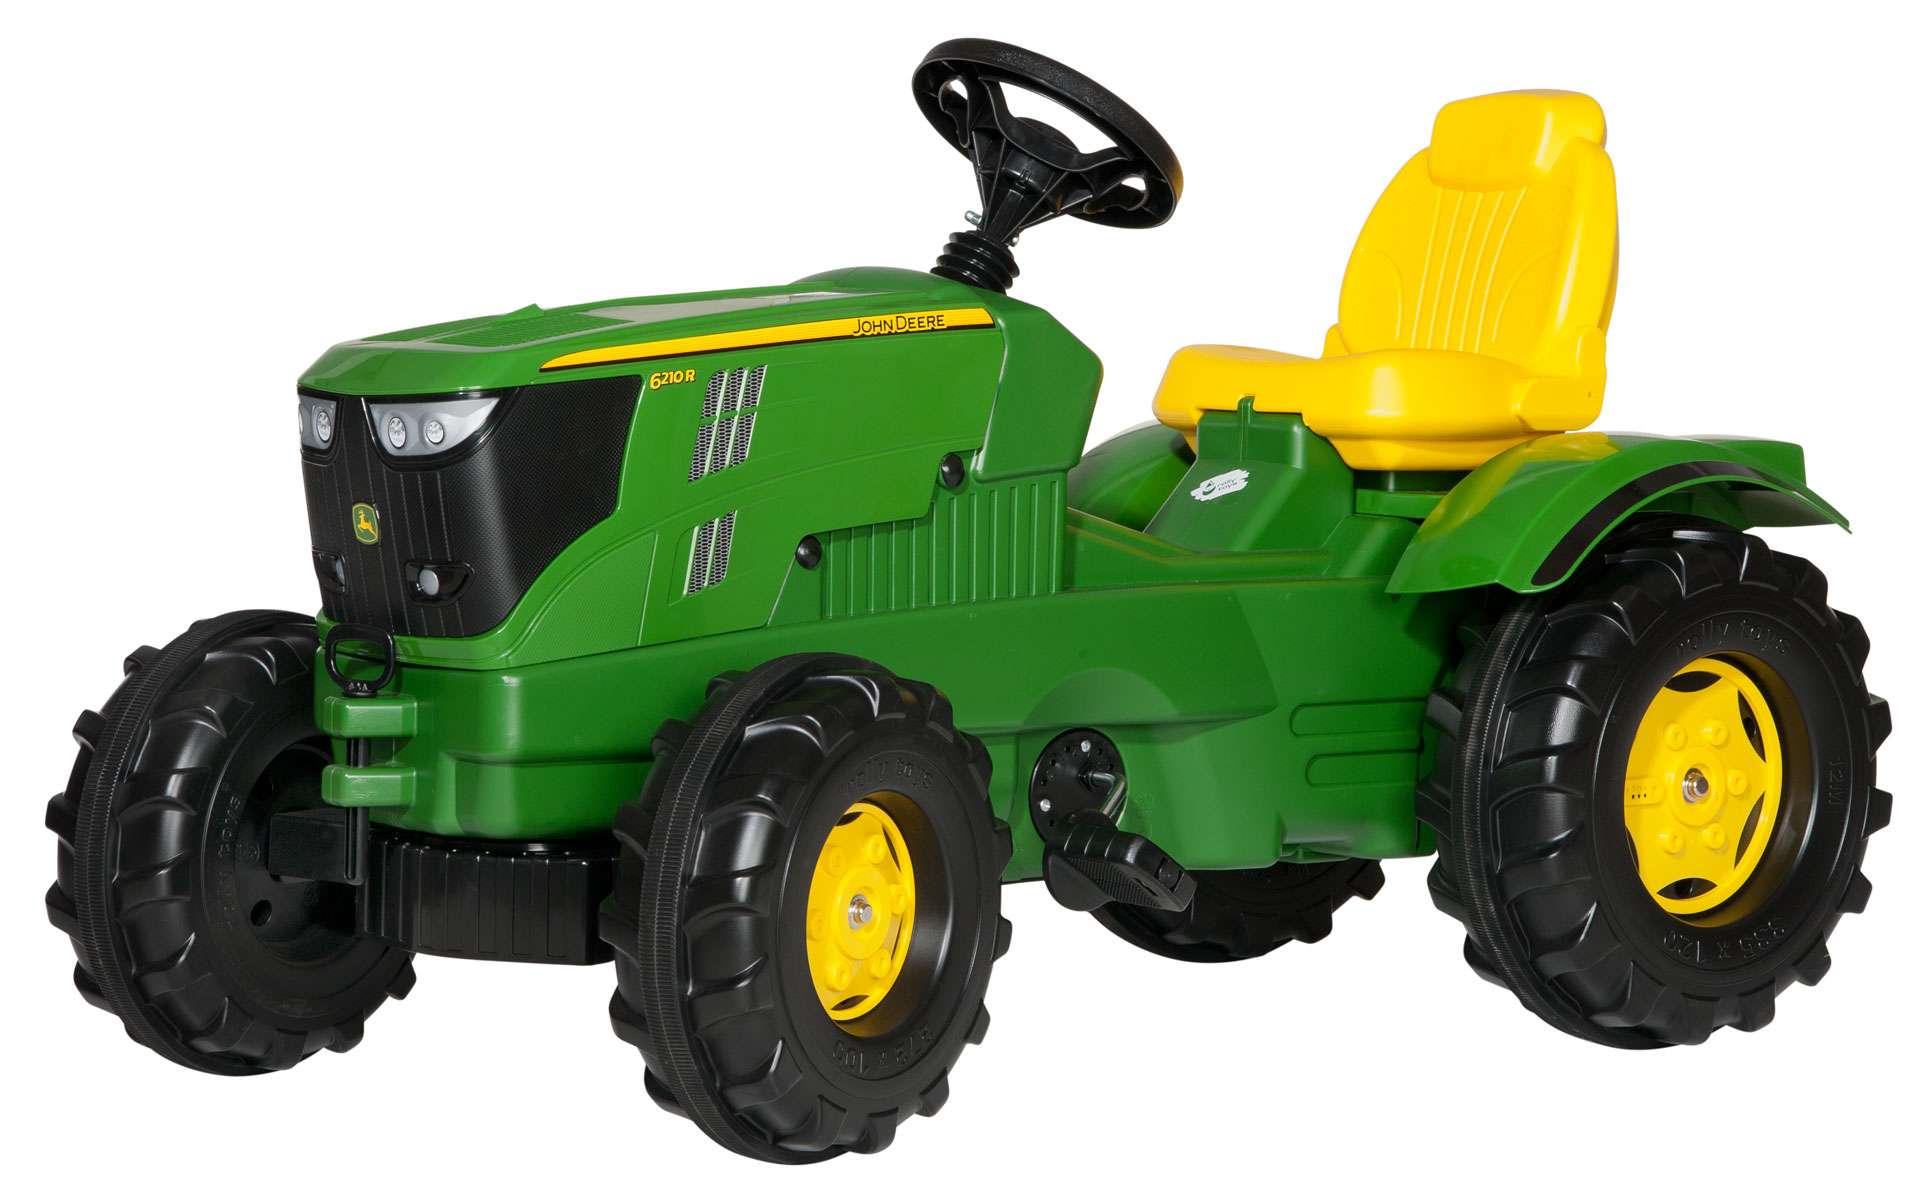 Rolly Toys - John Deere Tractor 6210R - Pedal ride-on (601066)